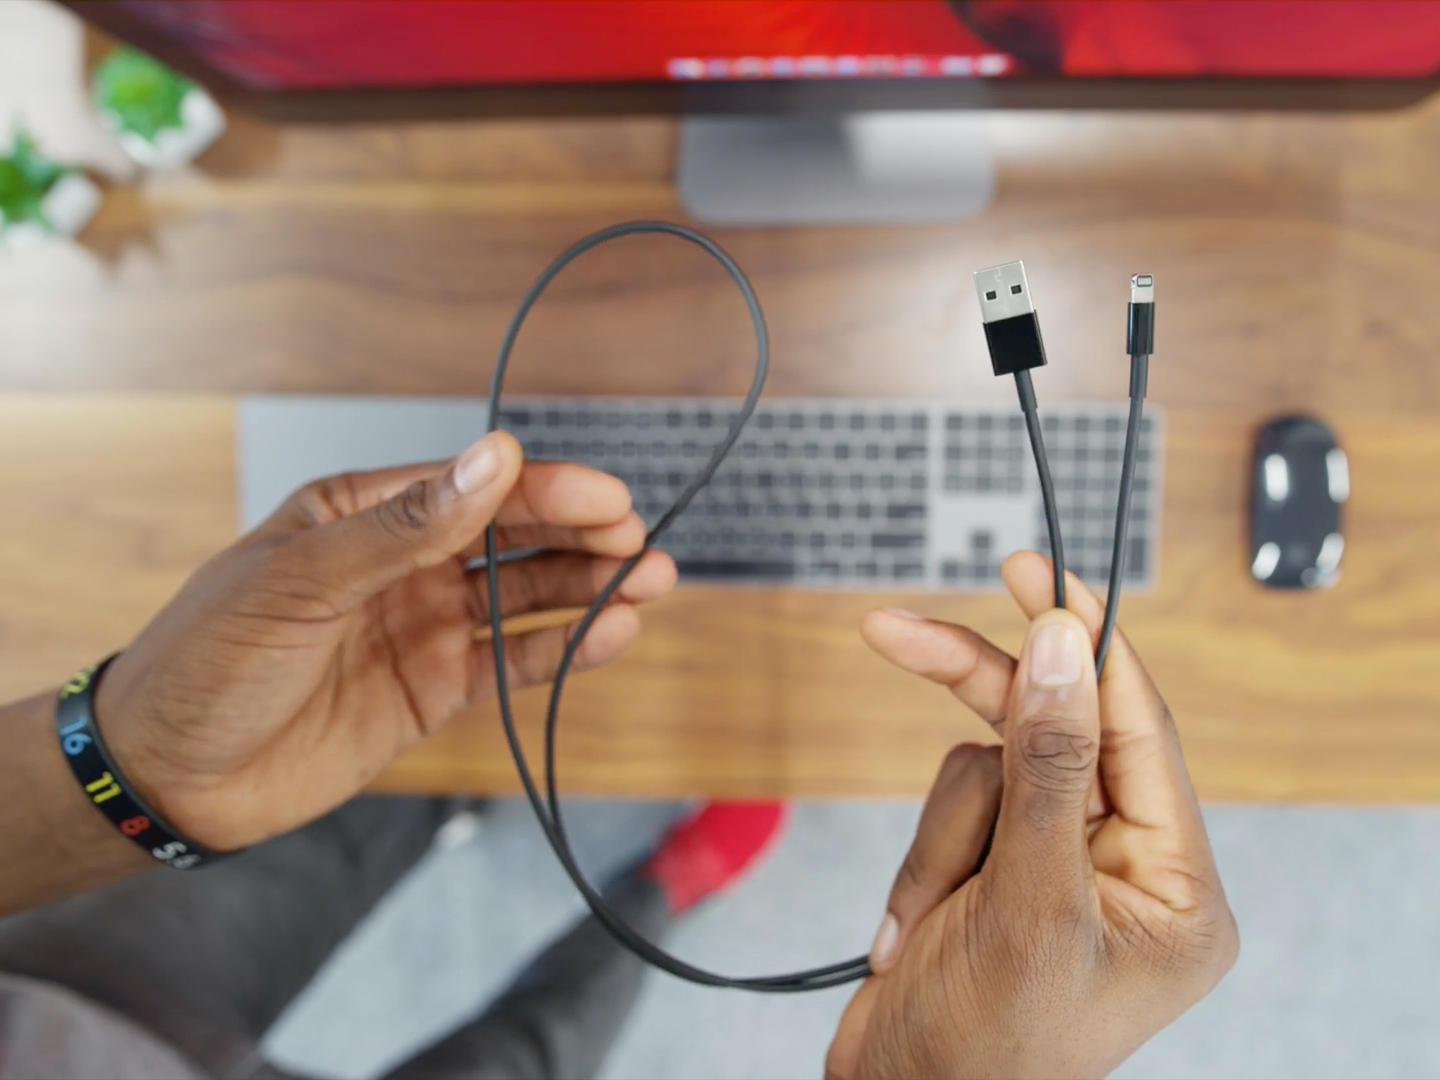 Apple Just Introduced Its First Black Lightning Cable for iMac Pro